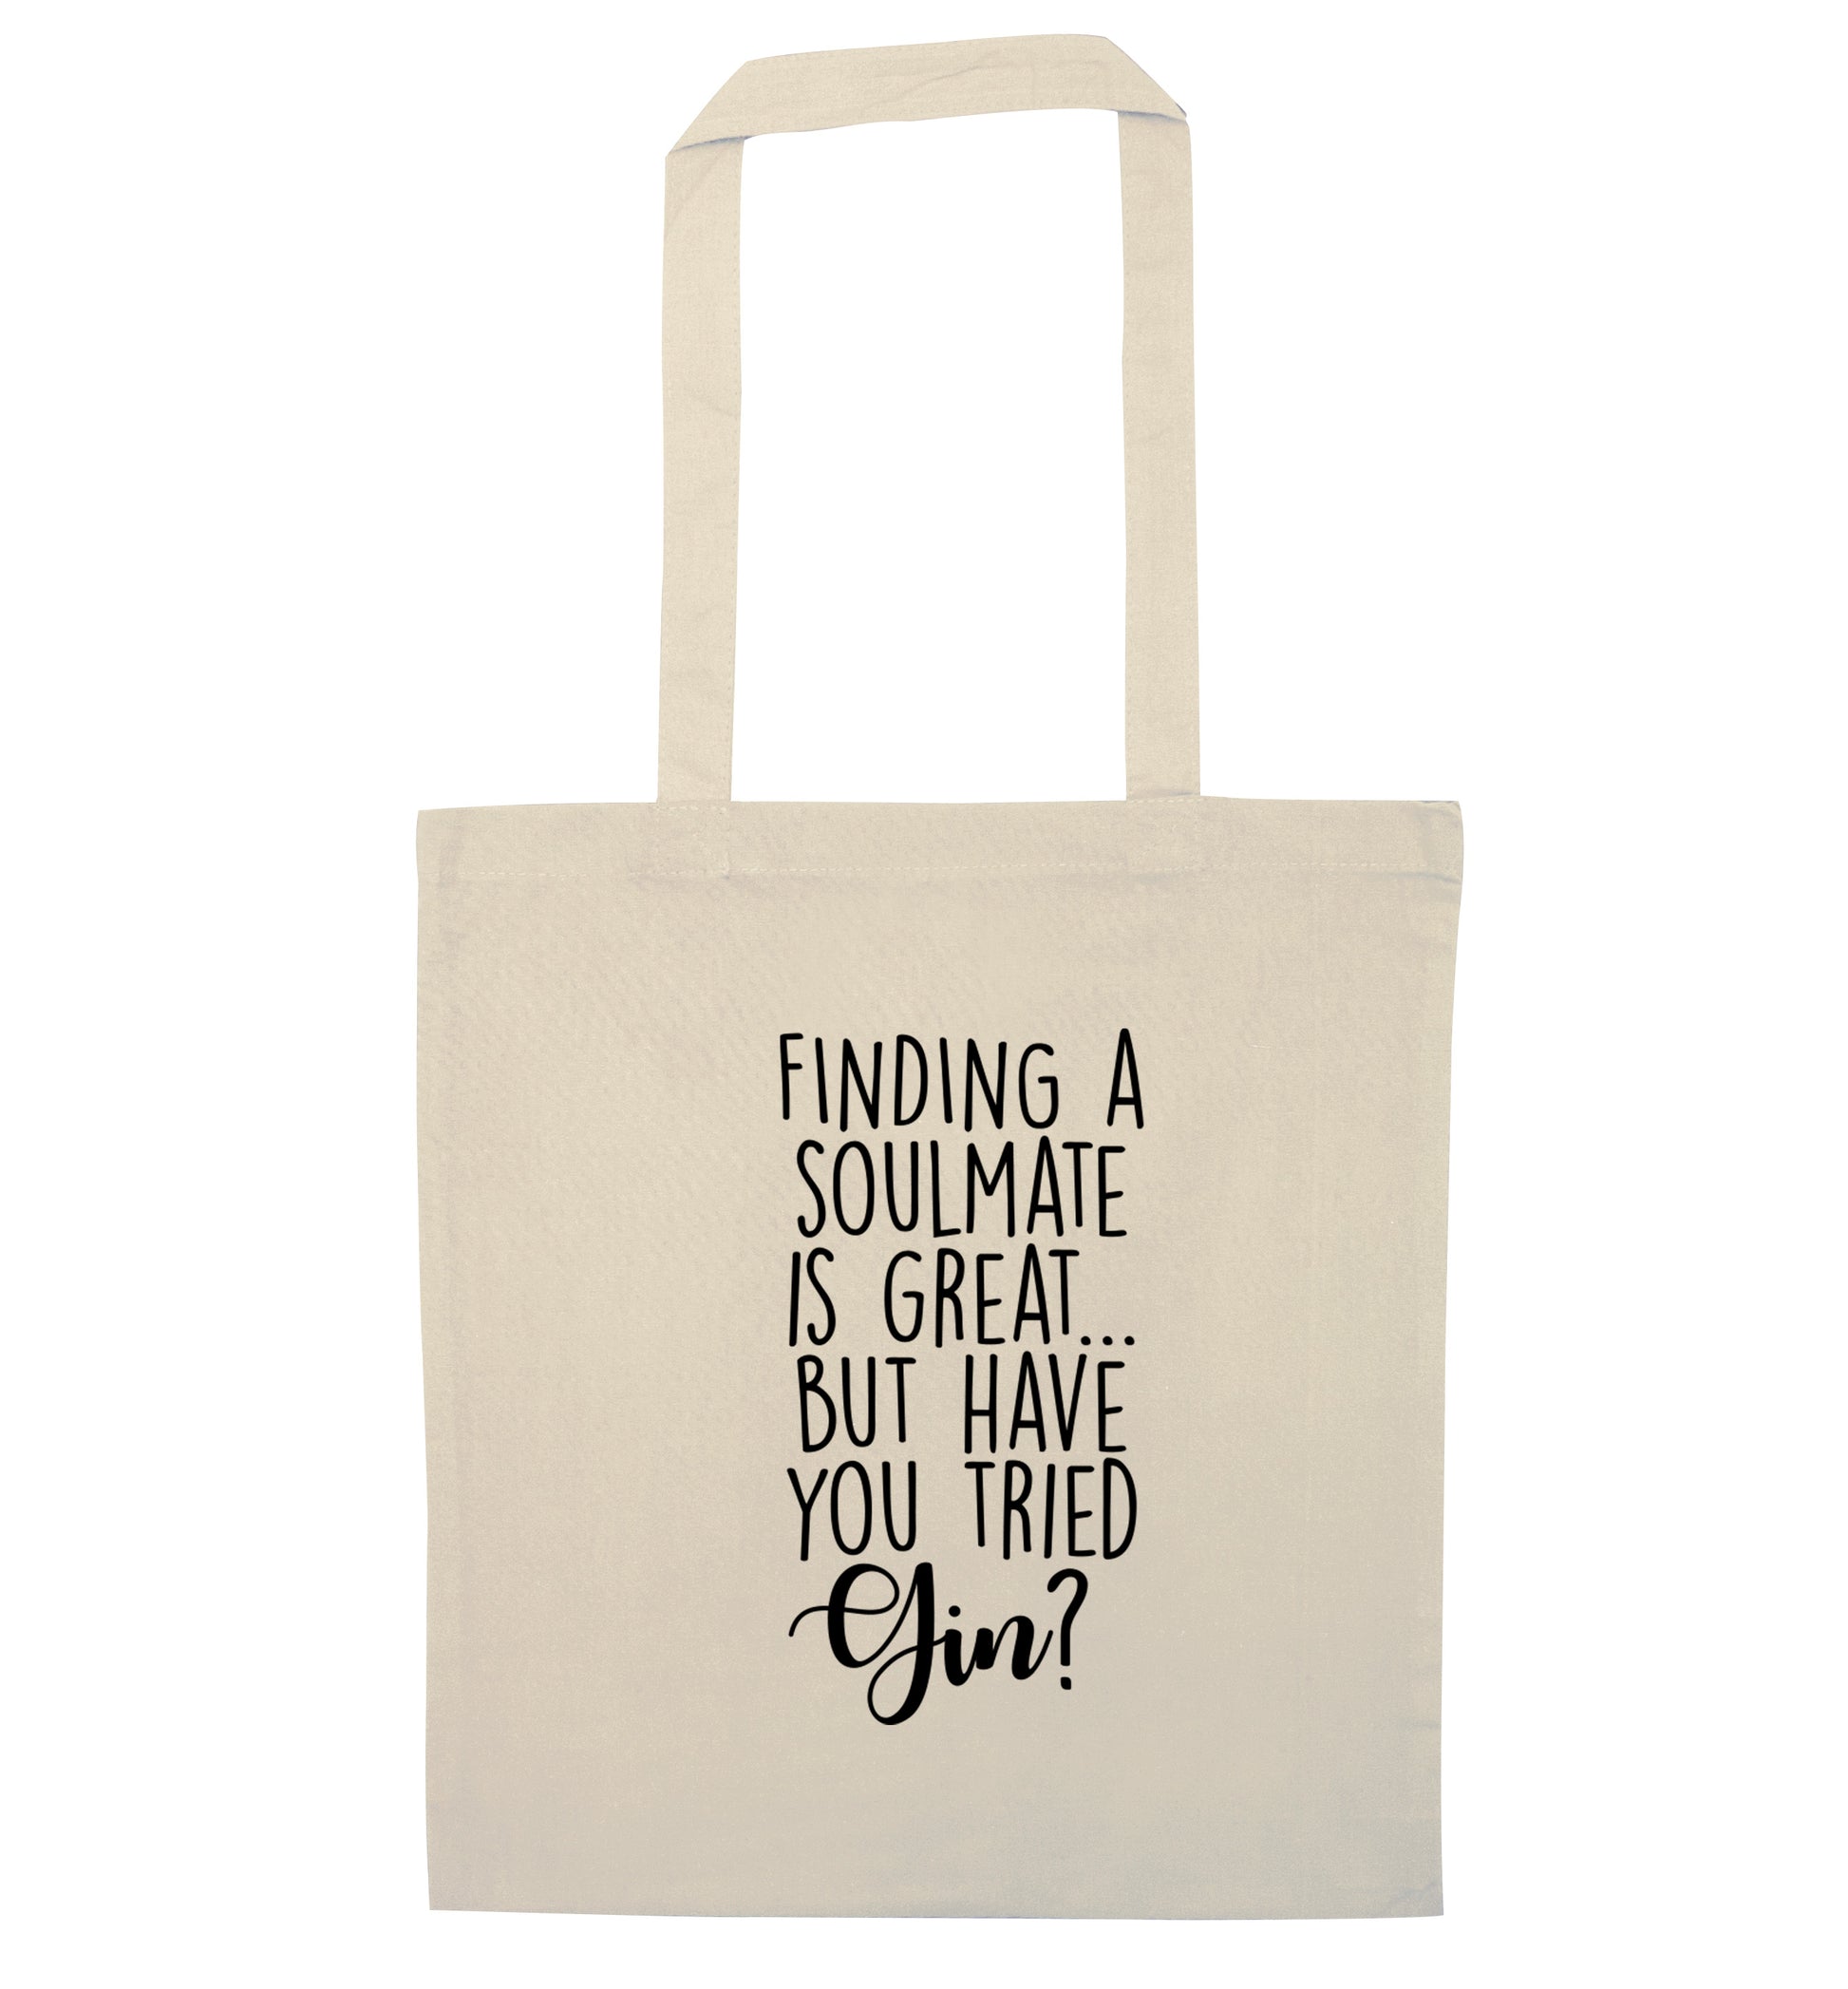 Finding a soulmate is great but have you tried gin? natural tote bag